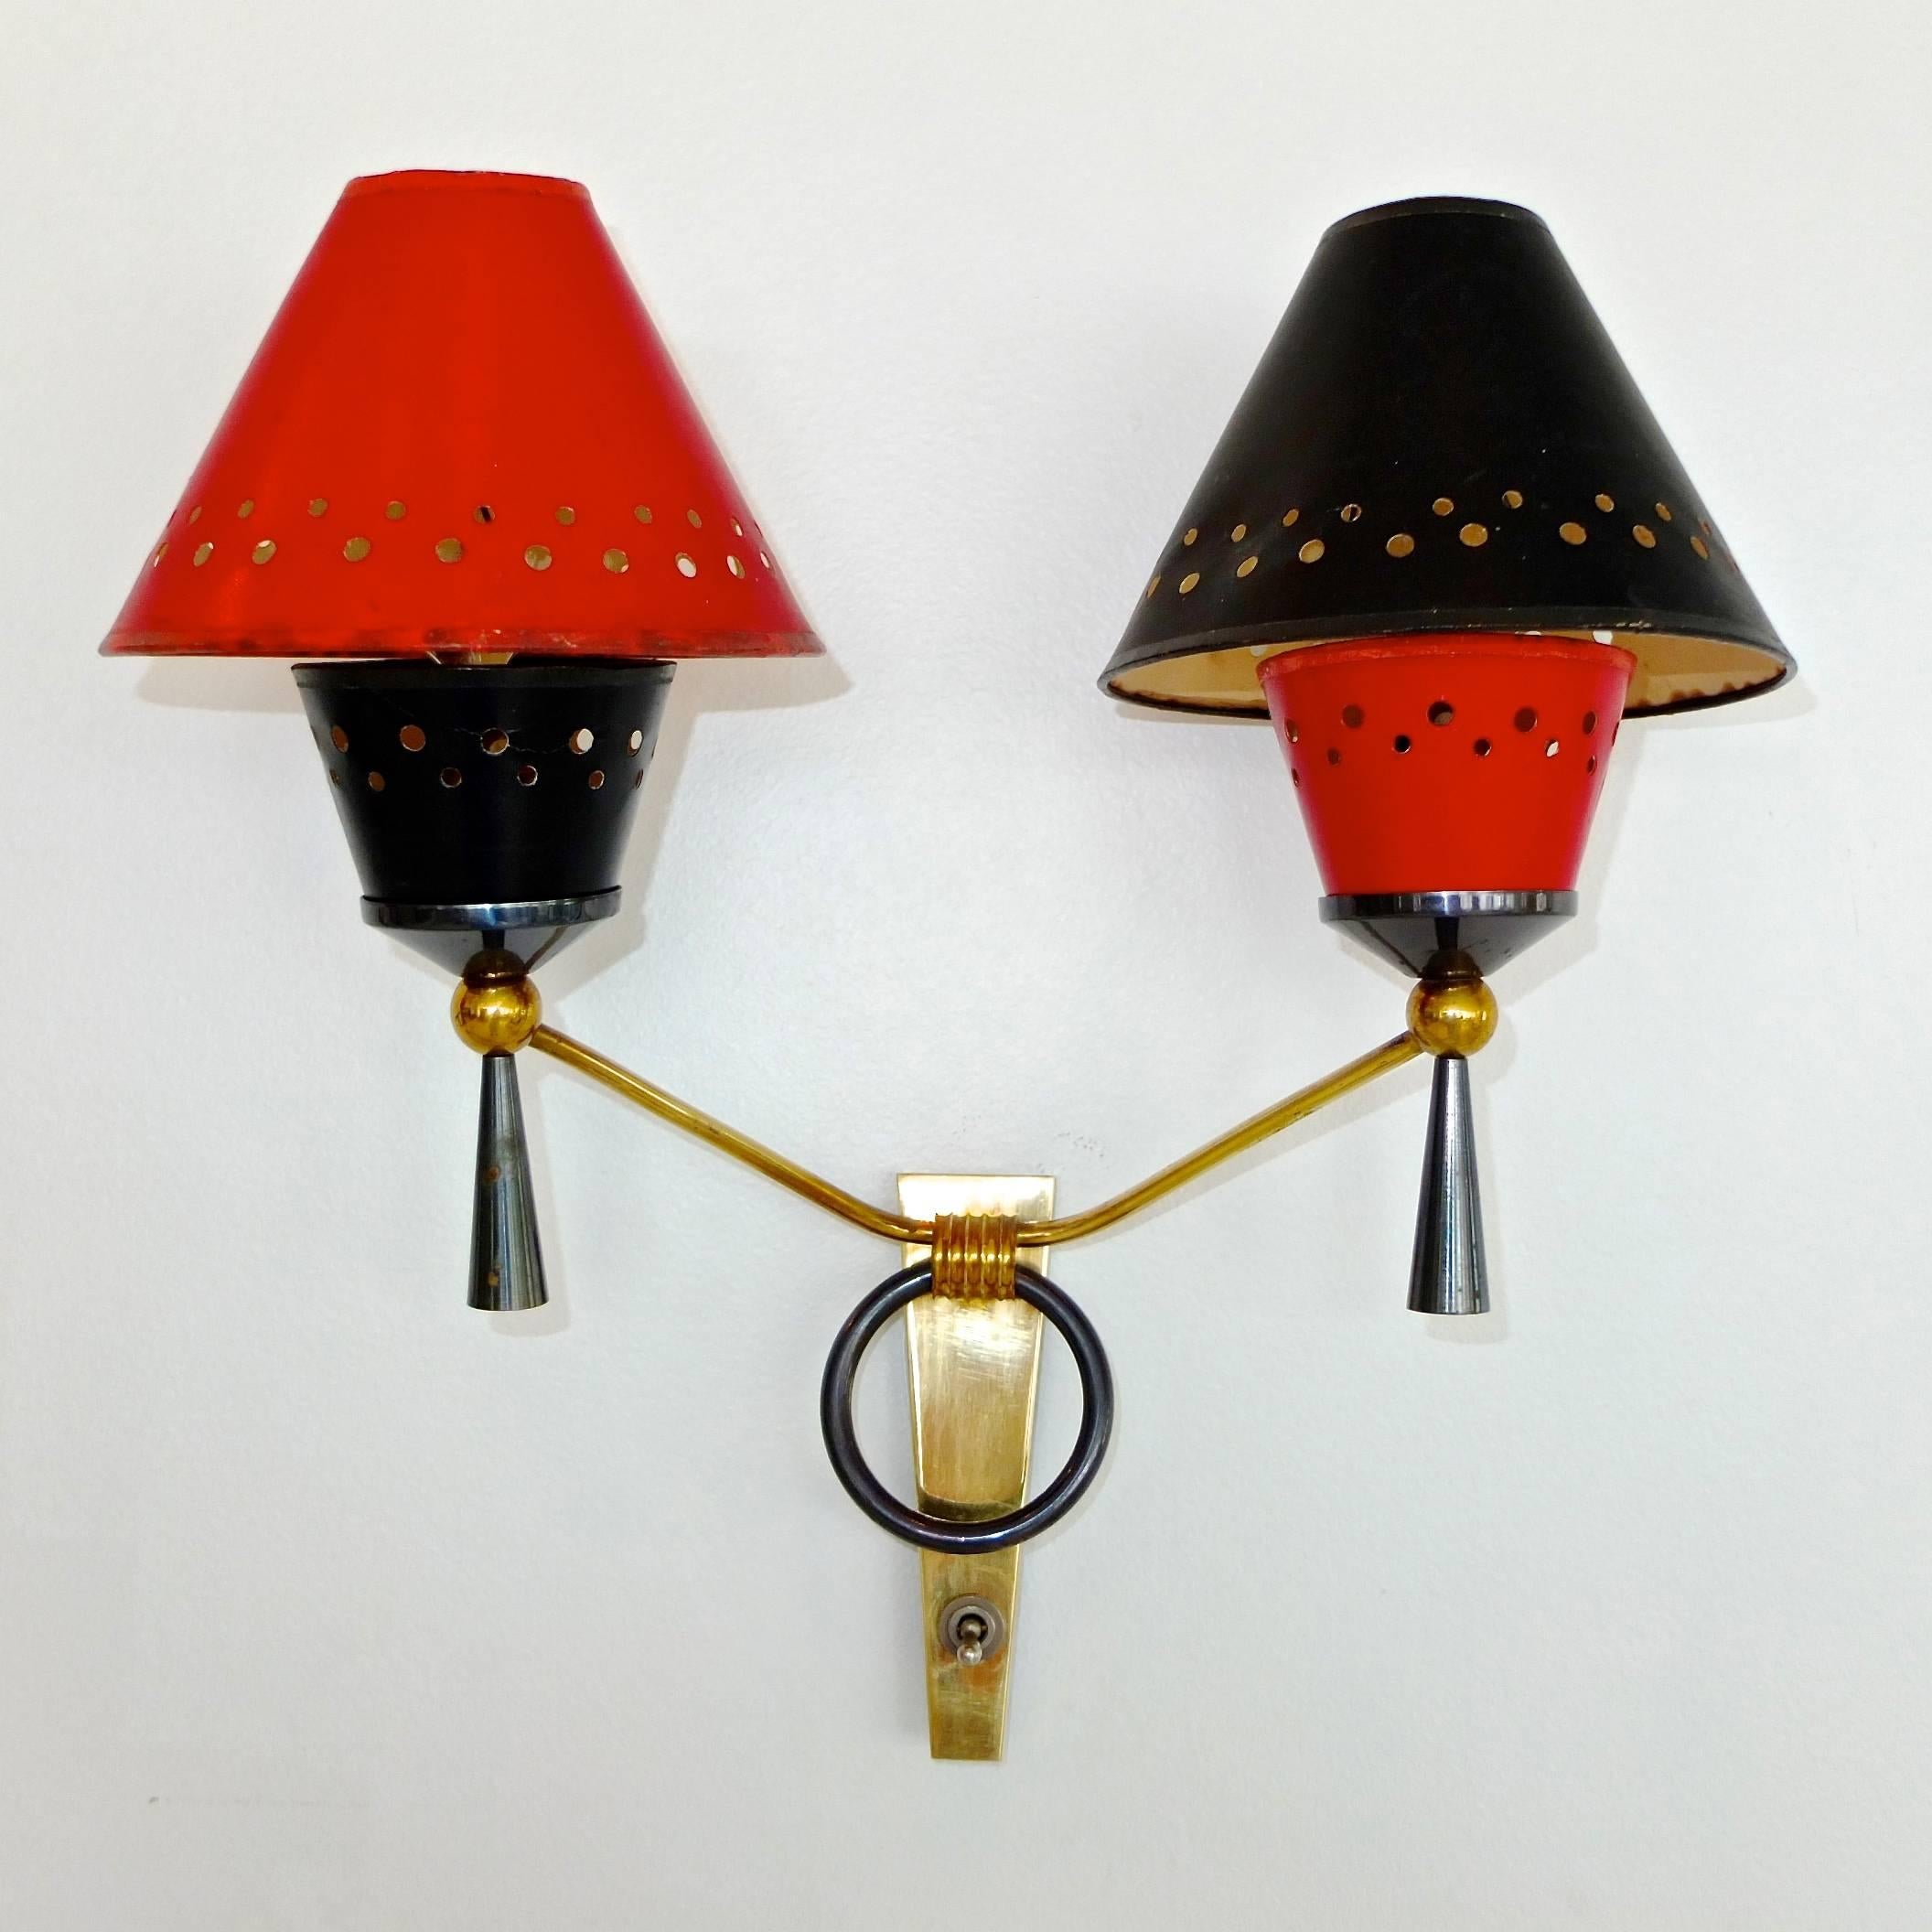 We actually have two pair available but this listing is for one pair of 1950s, French wall lamps by Maison Lunel in the style of Jacques Adnet having double brass arms with gunmetal accents. The wedge form backplate has a flick on/off switch.